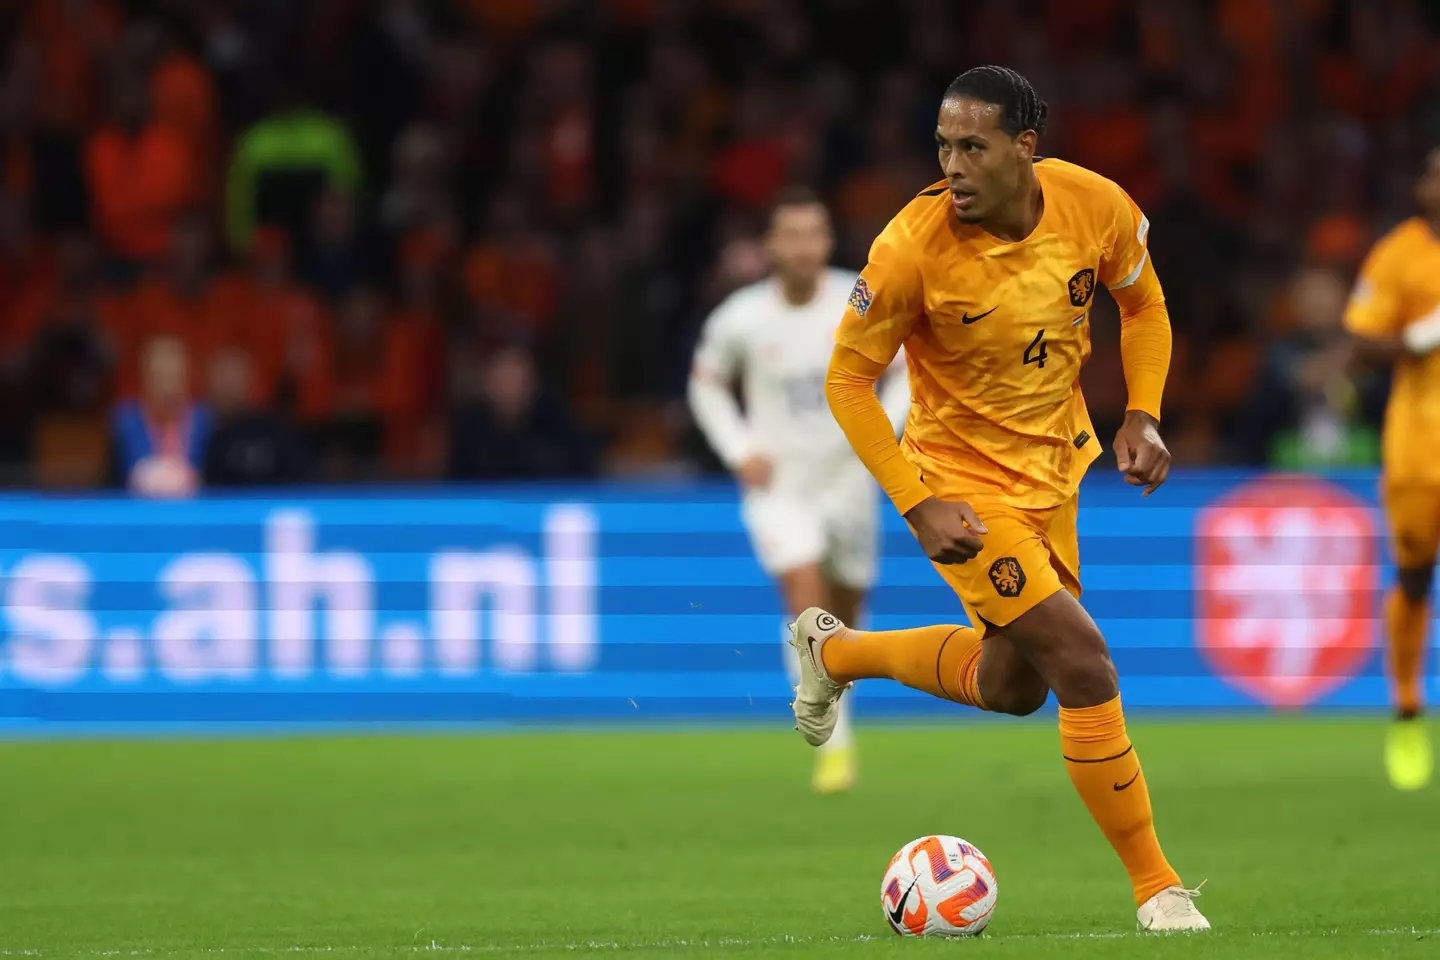 Van Dijk was criticised for not taking the initiative with his passing. Image: Alamy